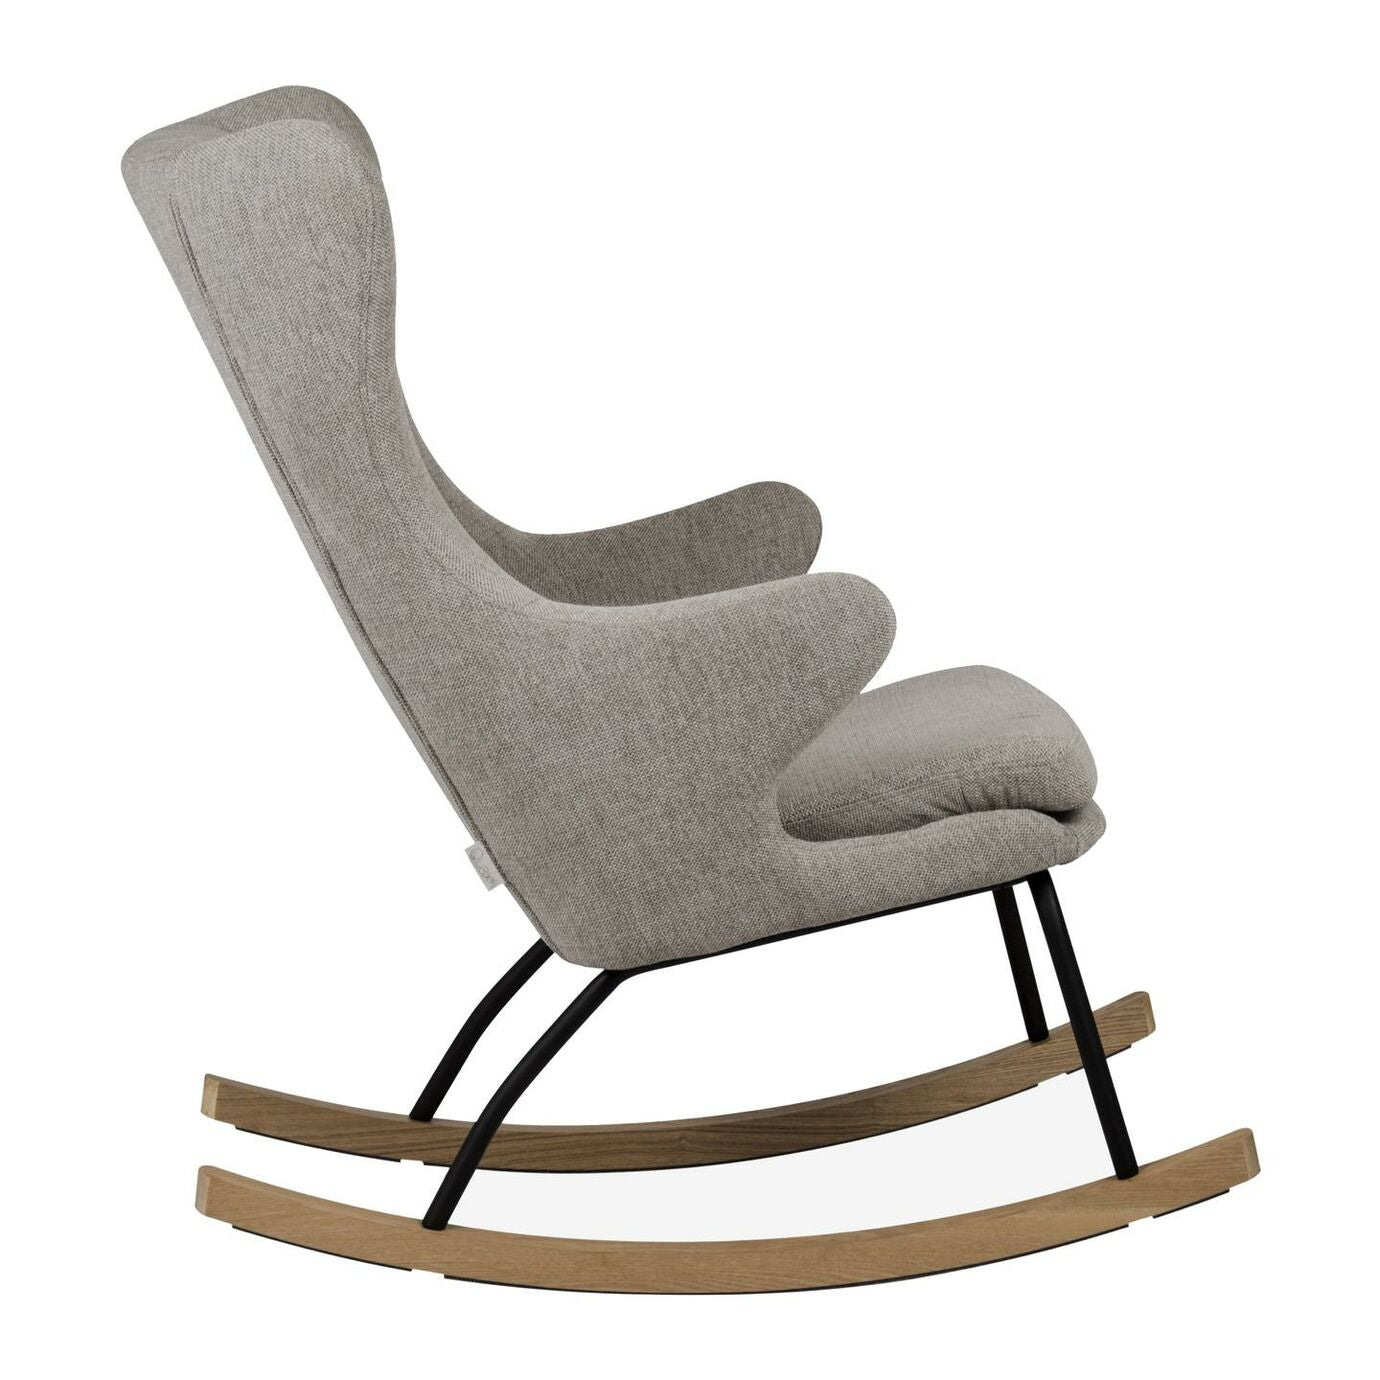 Quax Adult Rocking Chair De Luxe - Sand Grey